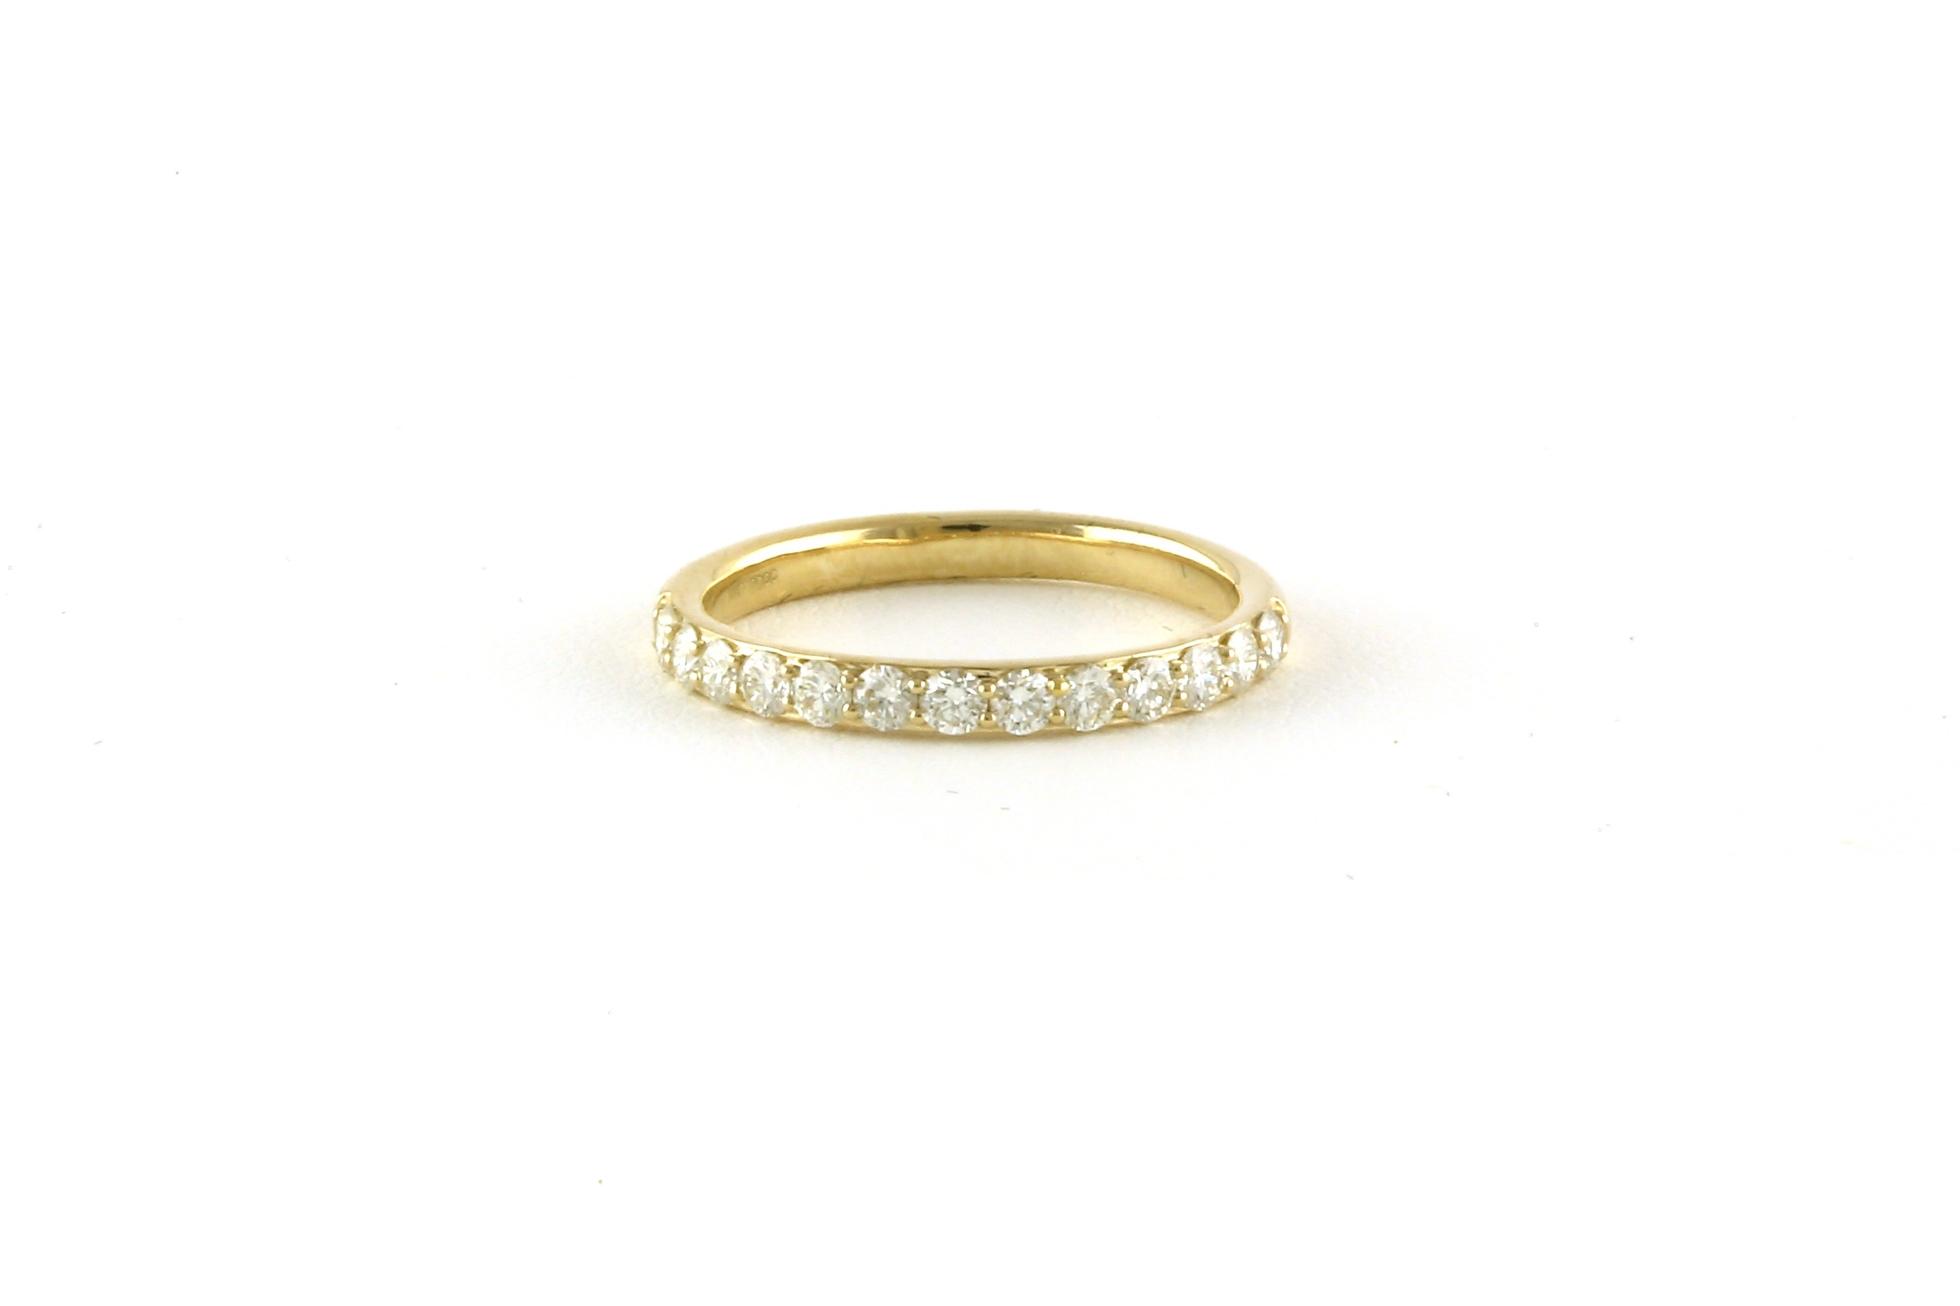 13-Stone Share-prong Diamond Wedding Band in Yellow Gold (0.50cts TWT)